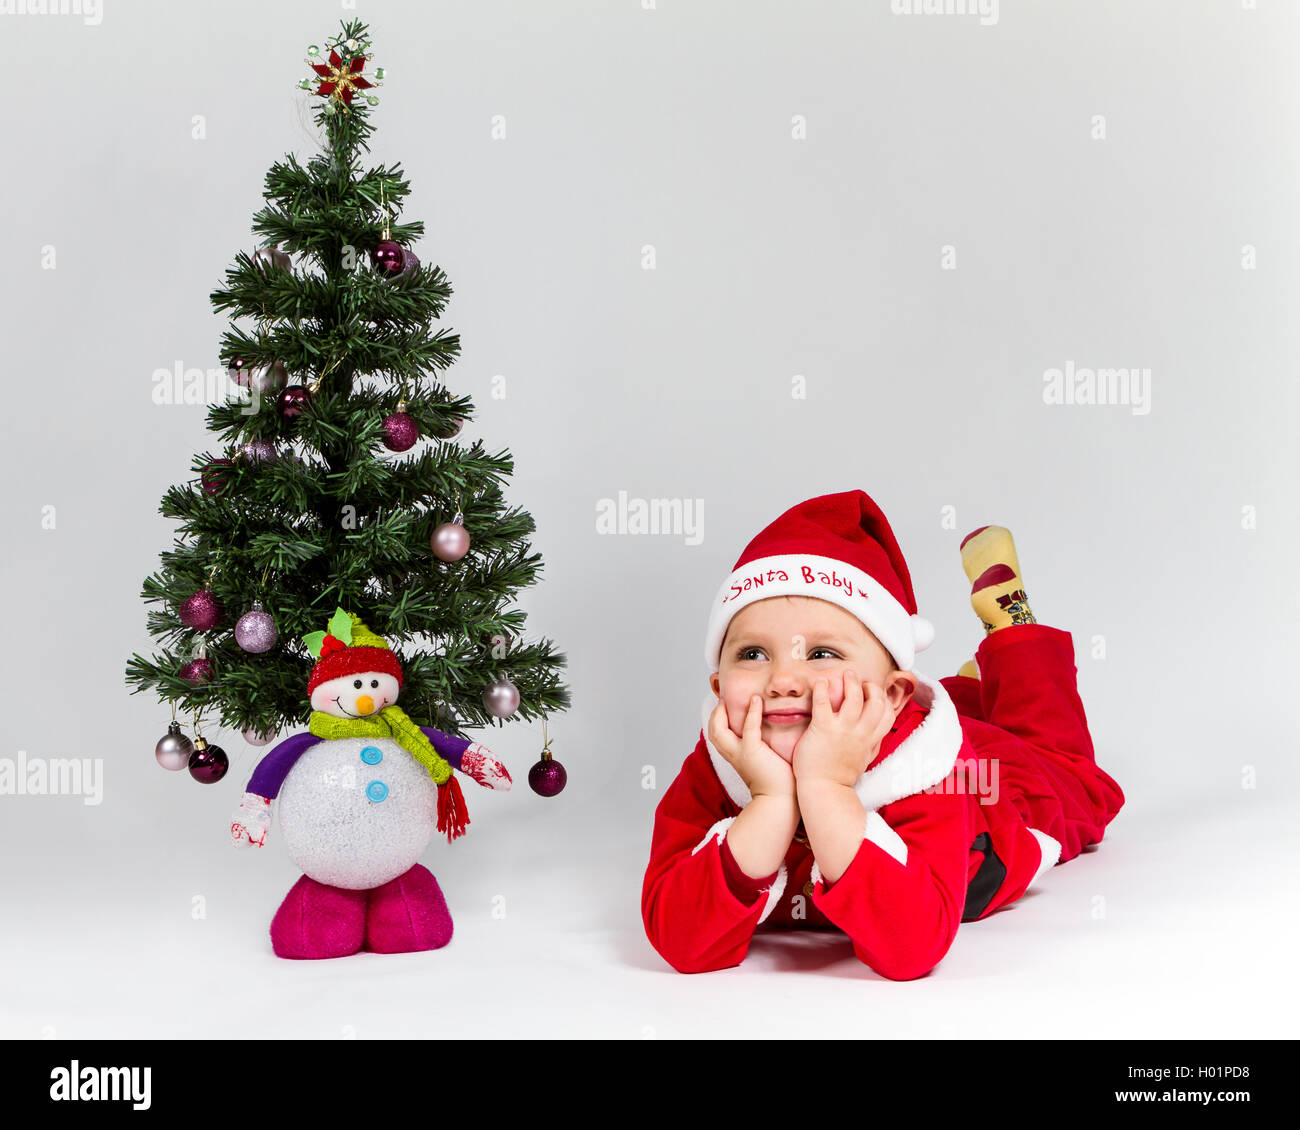 Dreaming baby boy dressed as Santa Claus lying next to Christmas tree. White background. Stock Photo